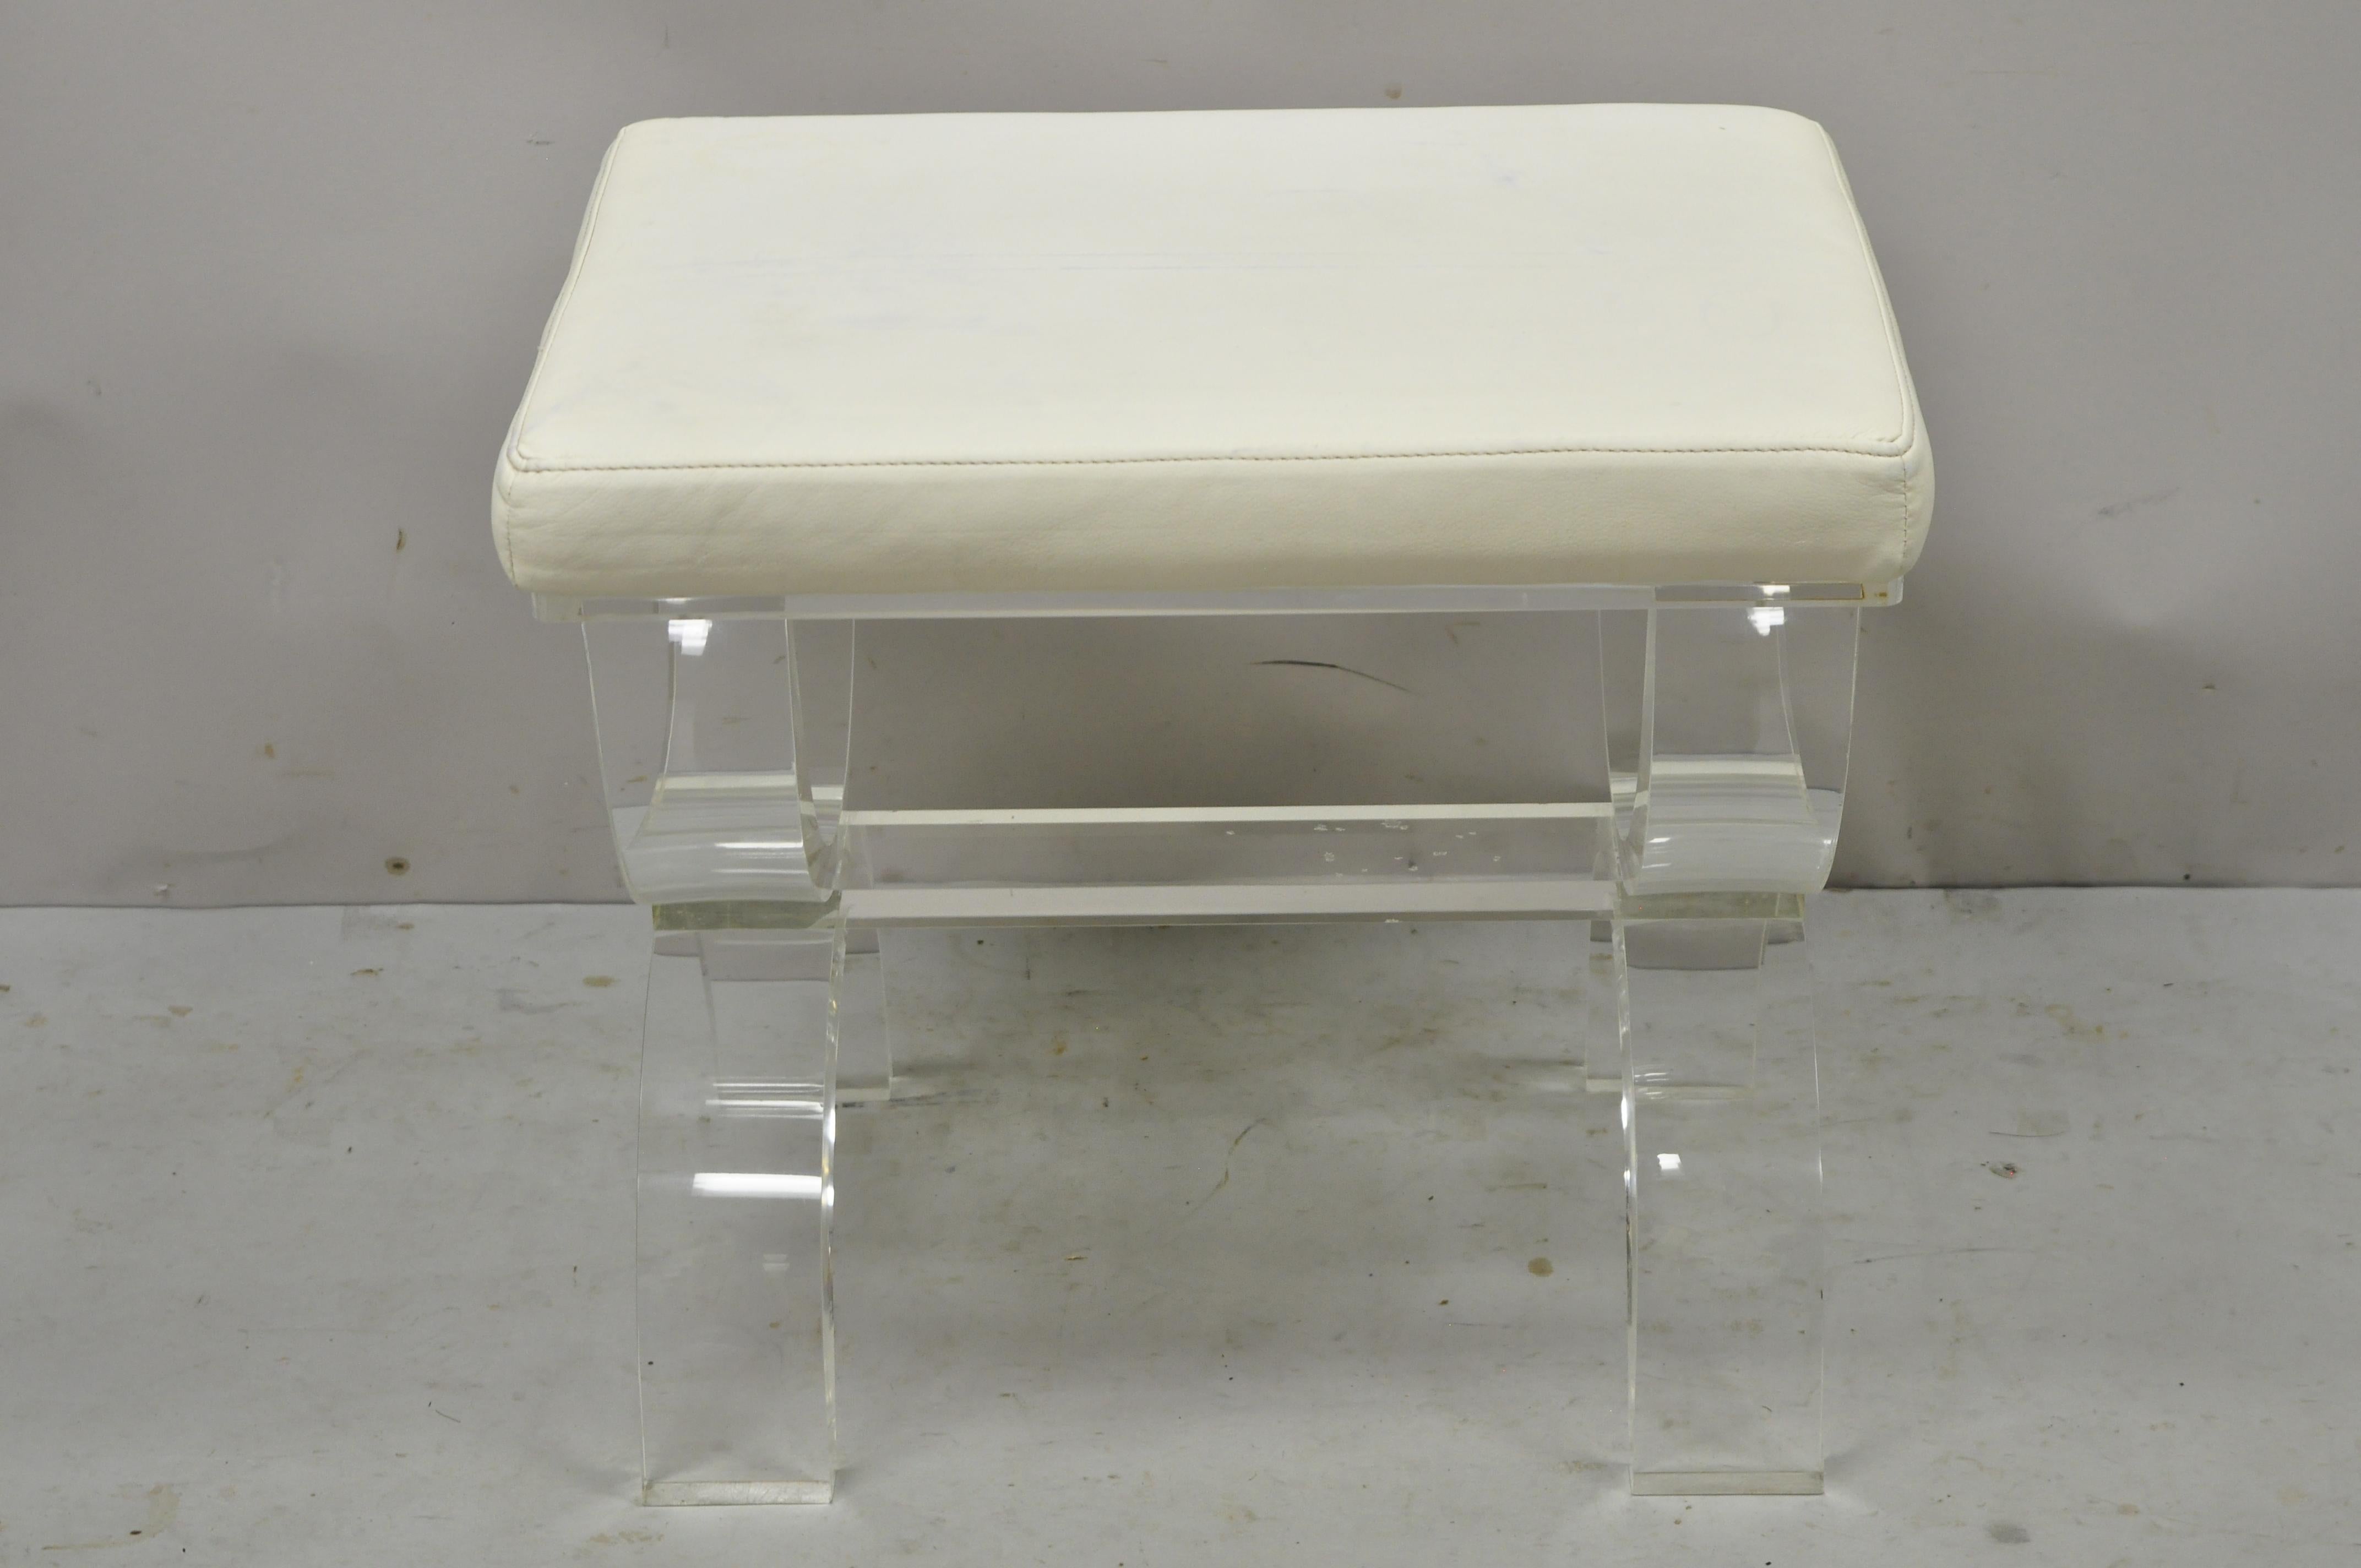 Modern clear lucite acrylic mid century style X-frame vanity bench stool. Item features heavy thick lucite sculptural base, white naugahyde upholstered seat, original label, quality craftsmanship, sleek sculptural form. Circa 21st century,